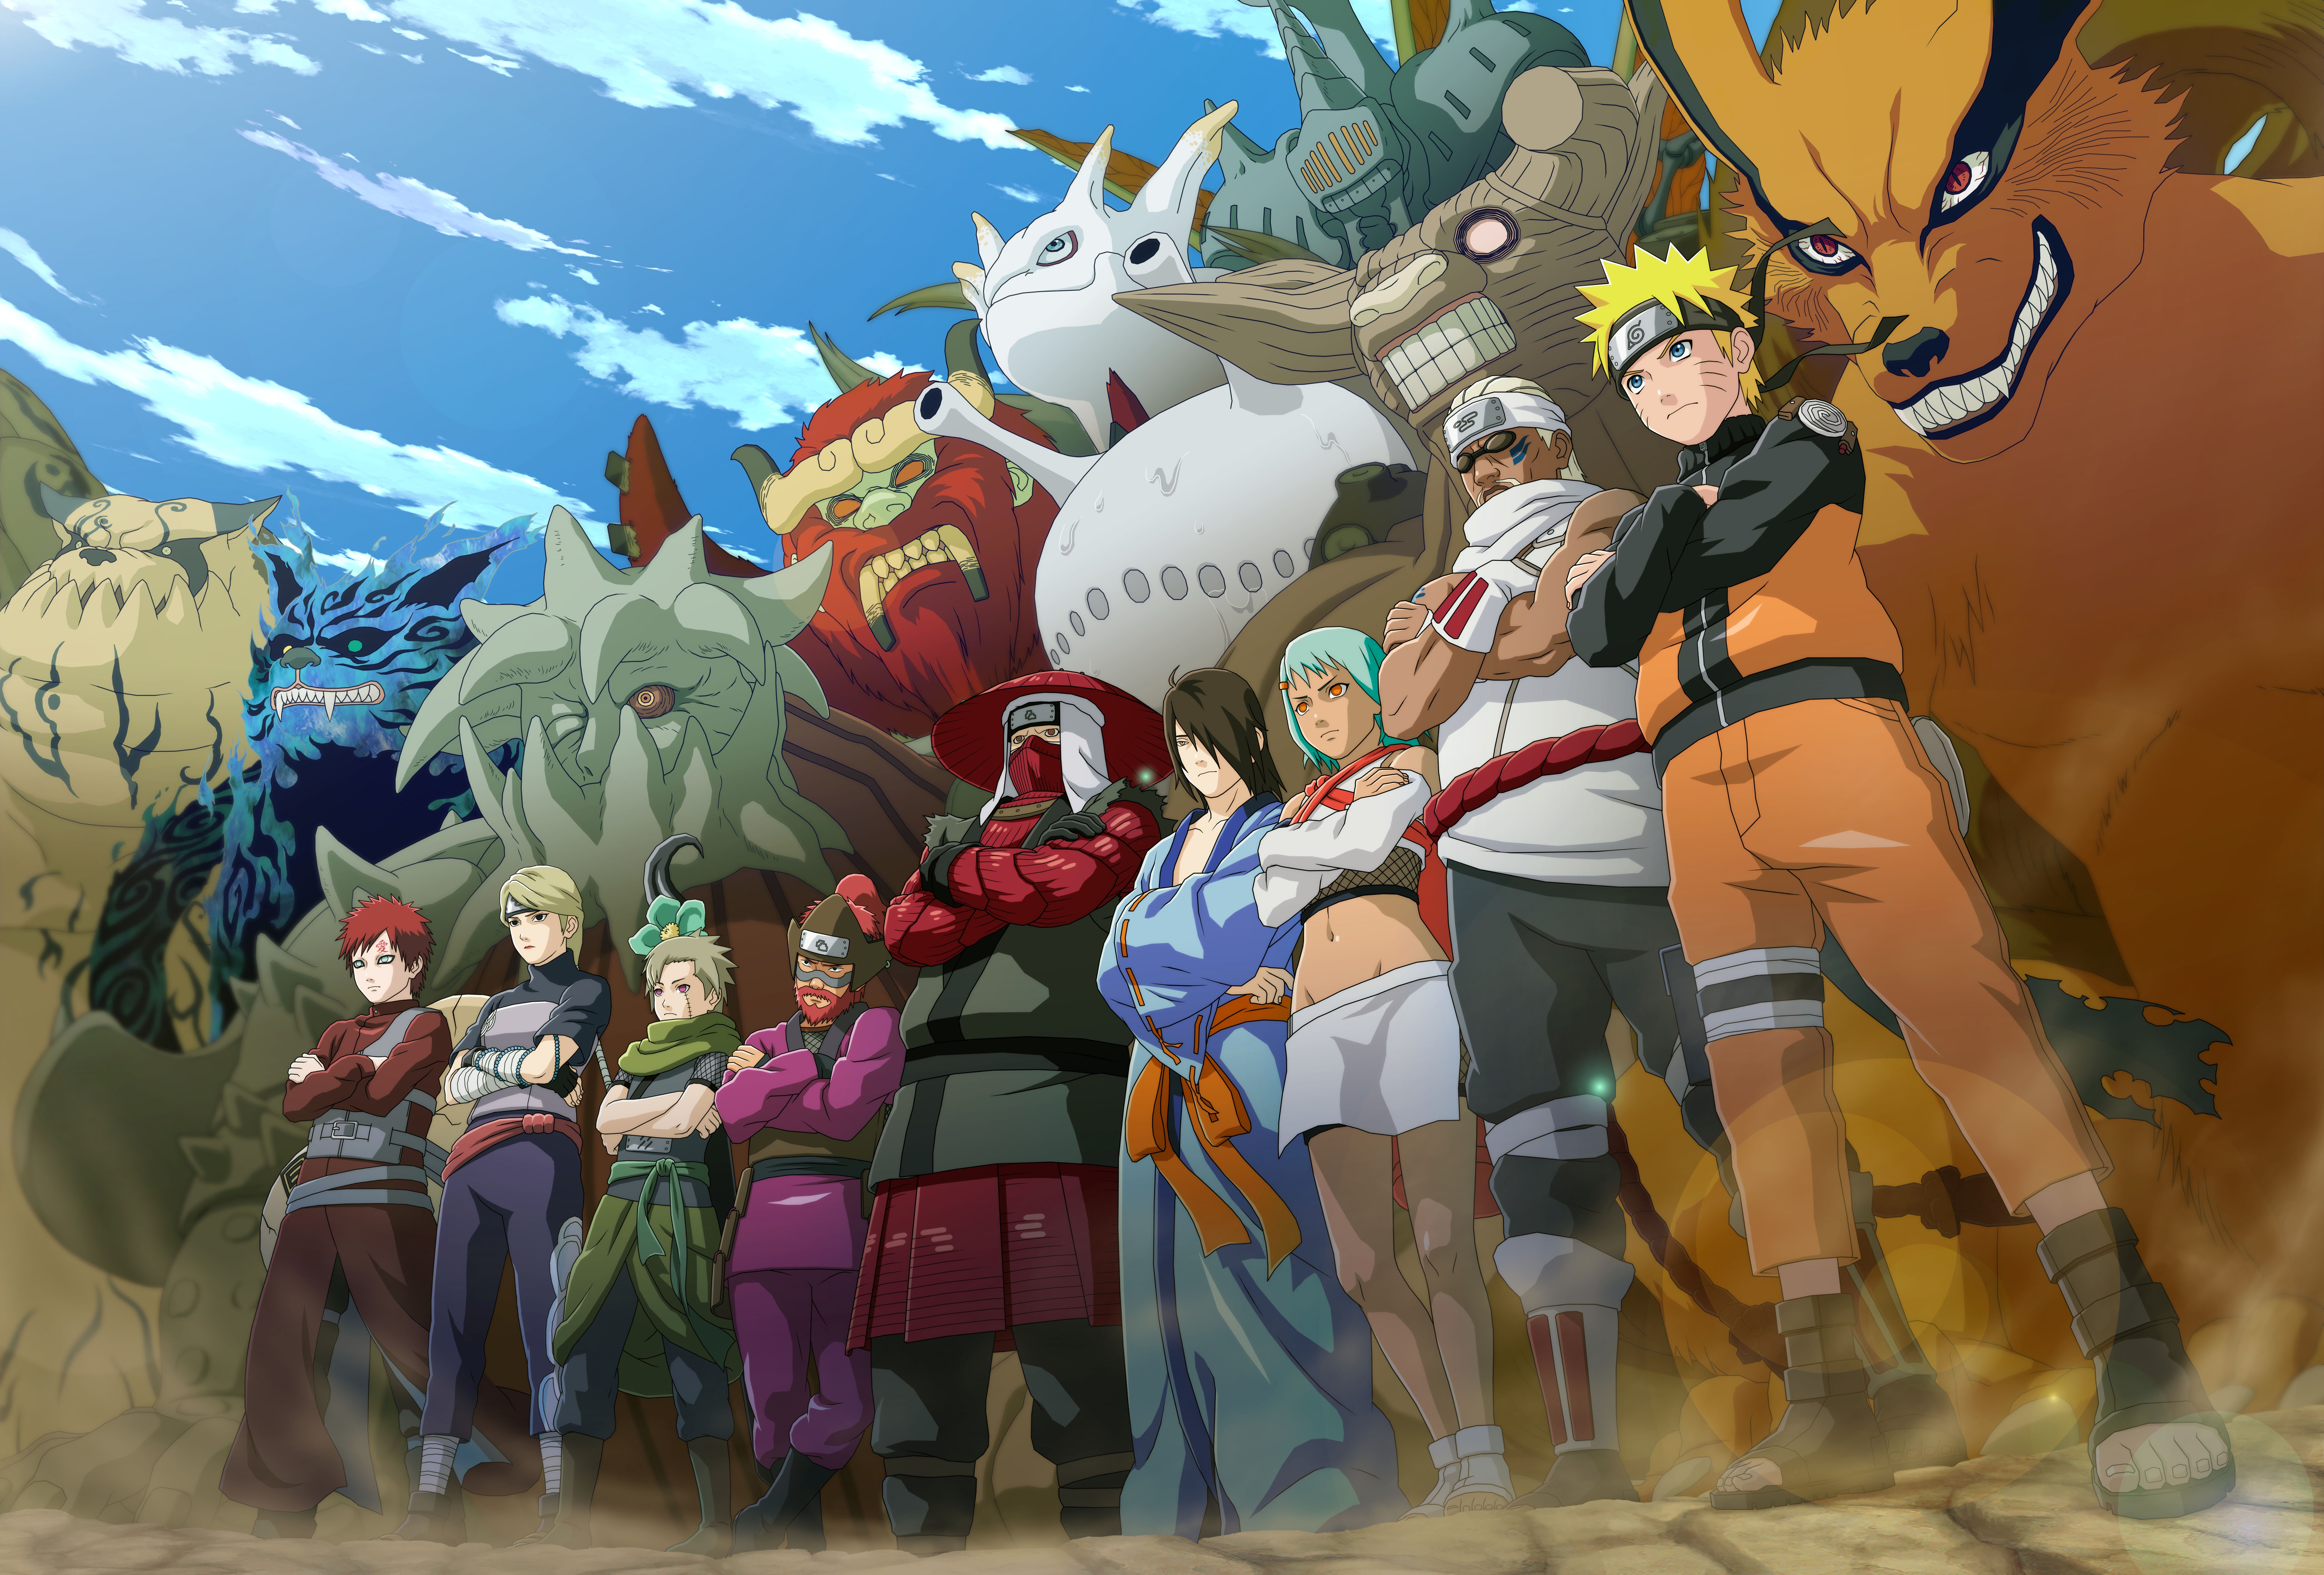 Saiken (Naruto) wallpapers for desktop, download free Saiken (Naruto)  pictures and backgrounds for PC 